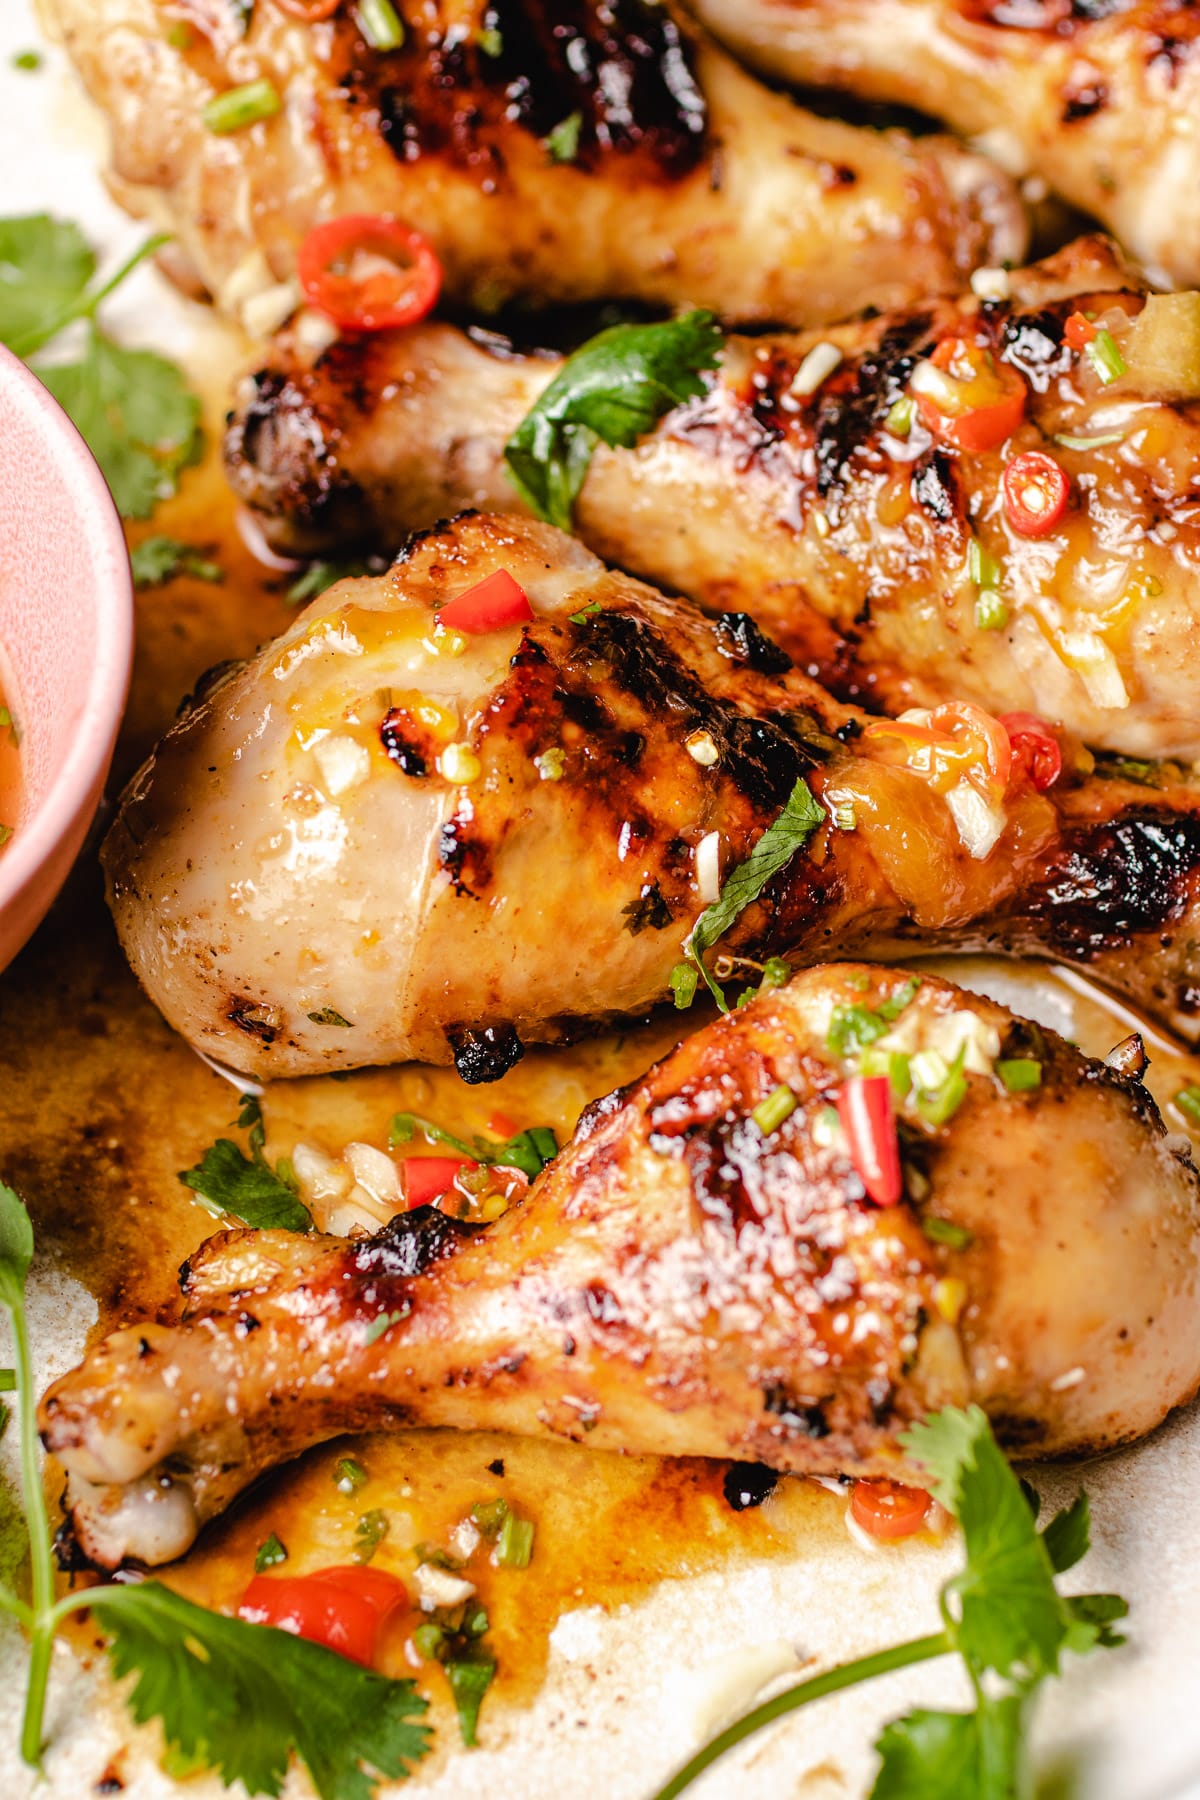 A side close shot shows juicy chicken legs grilled and covered with sweet chili bbq sauce